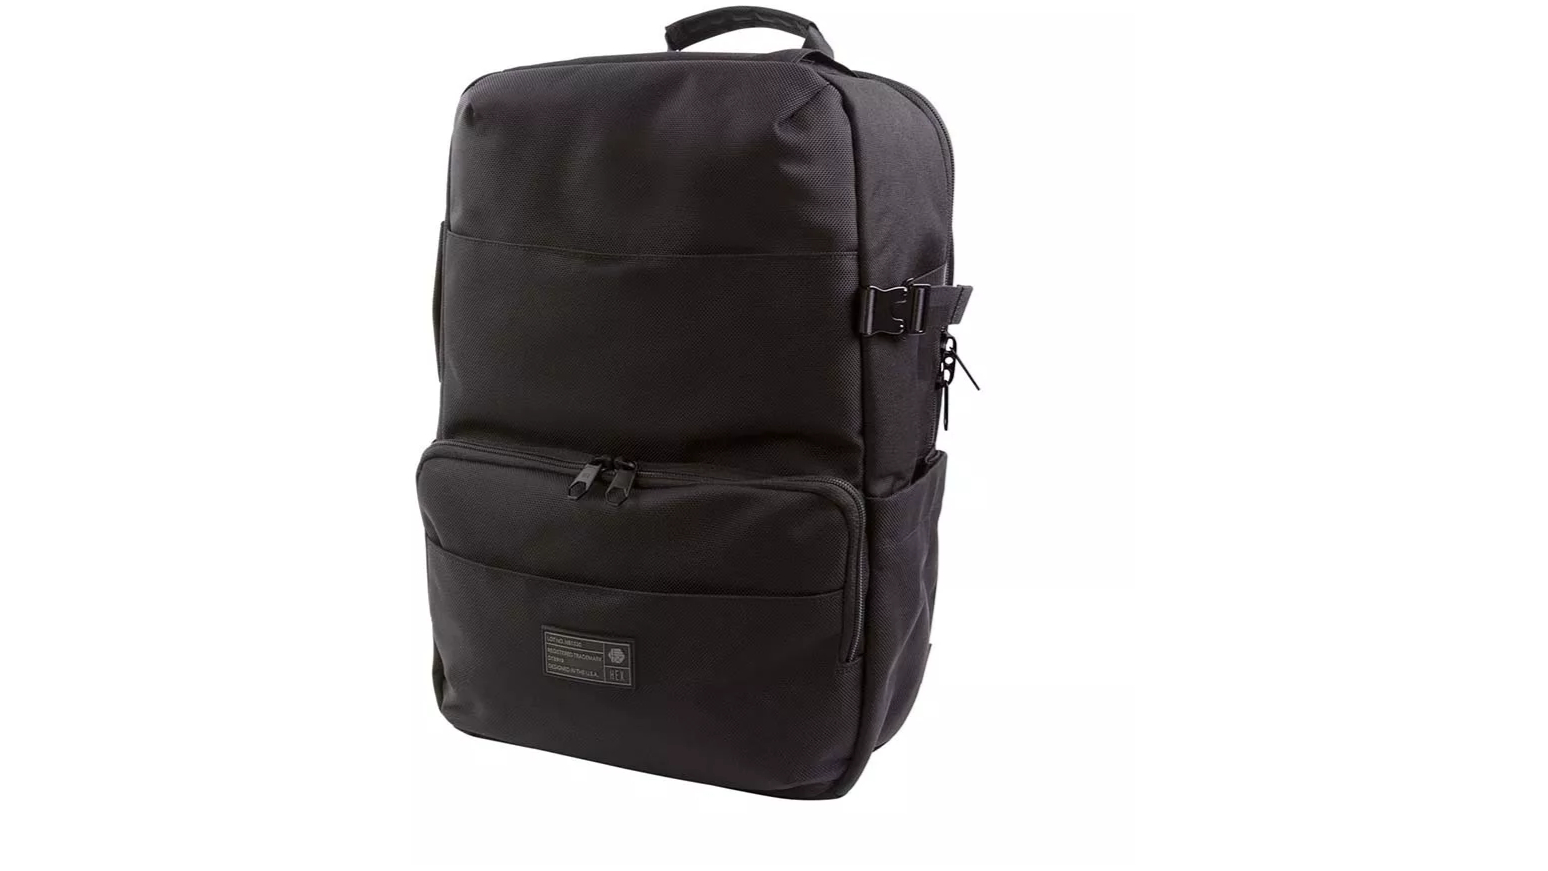 A Hex Technical BackPack against a white background